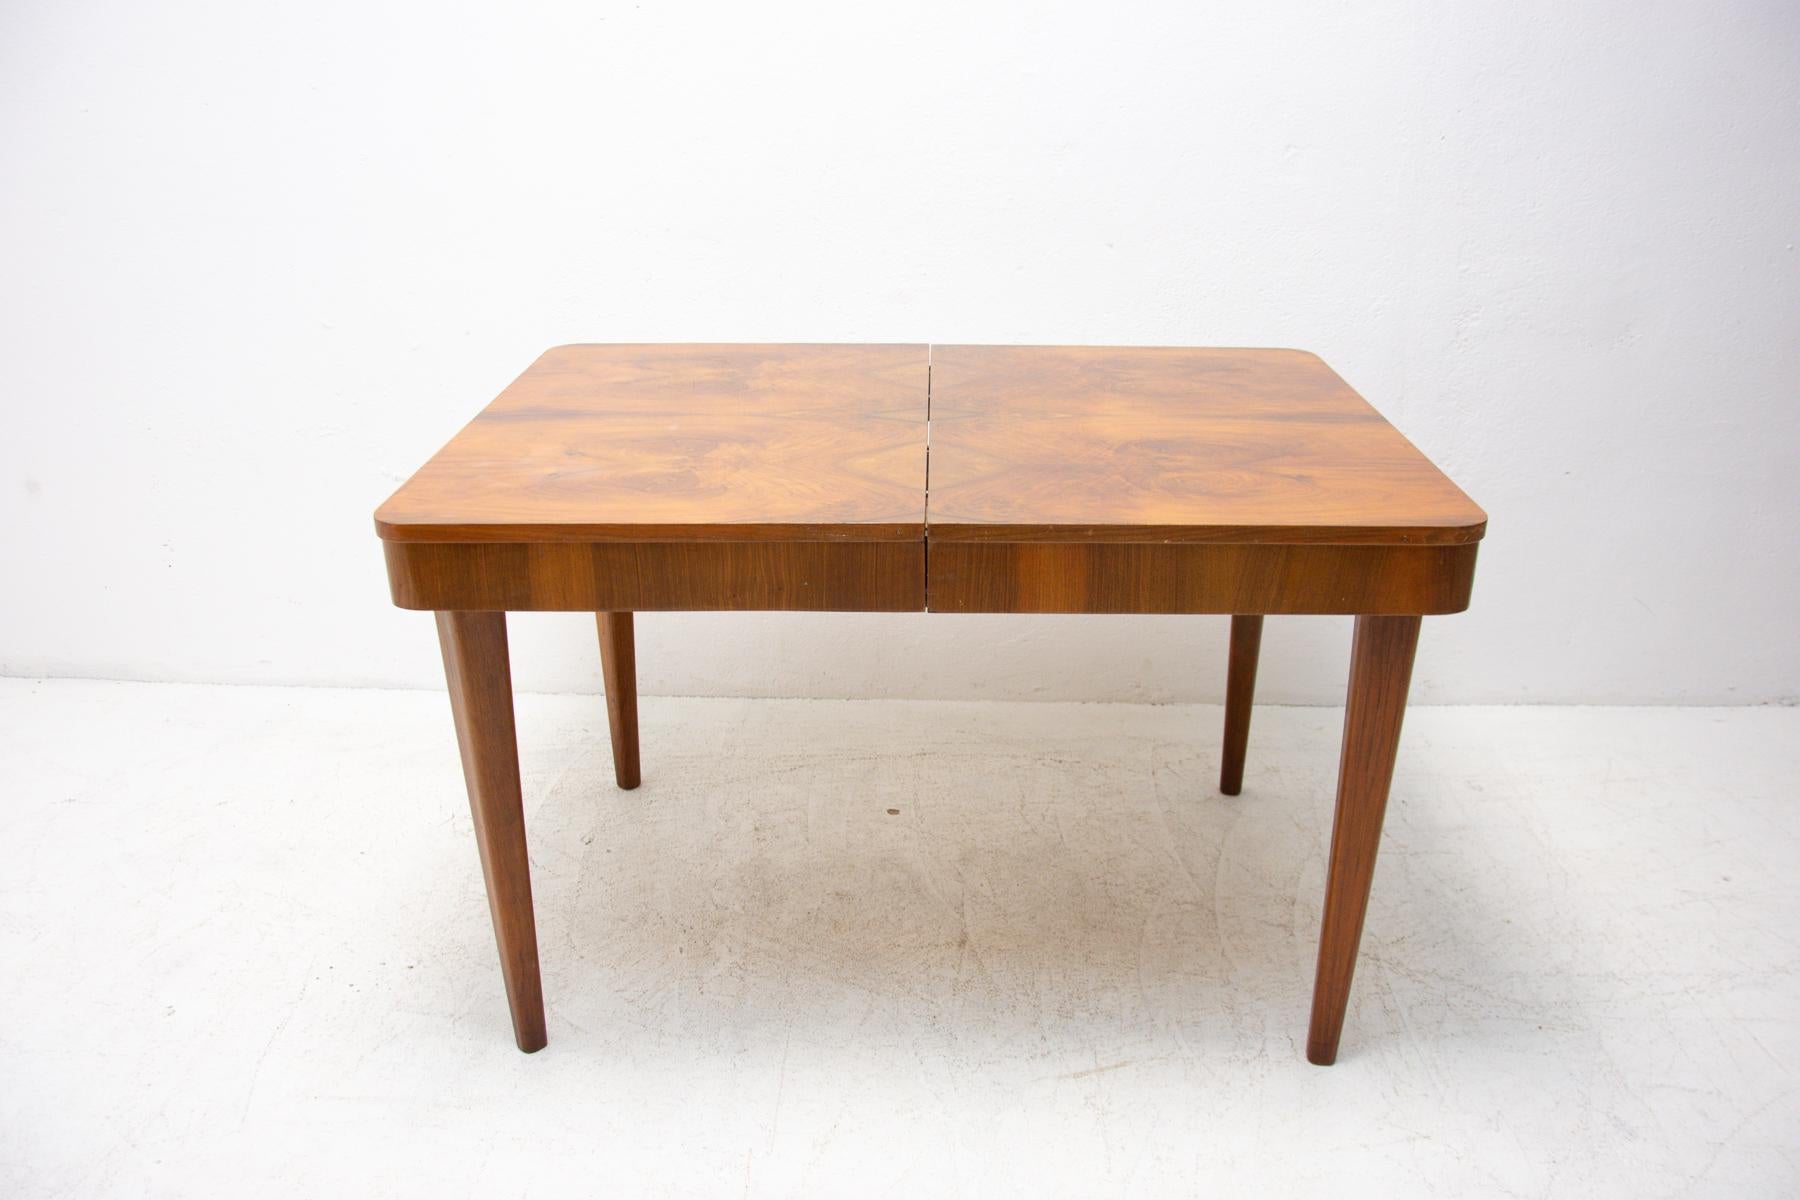 This adjustable dining table was designed and made in the 1950s in the former Czechoslovakia. It was designed by Jindrich Halabala for ÚP Závody Brno. The material is a combination of solid wood and walnut veneer. The table is in good Vintage